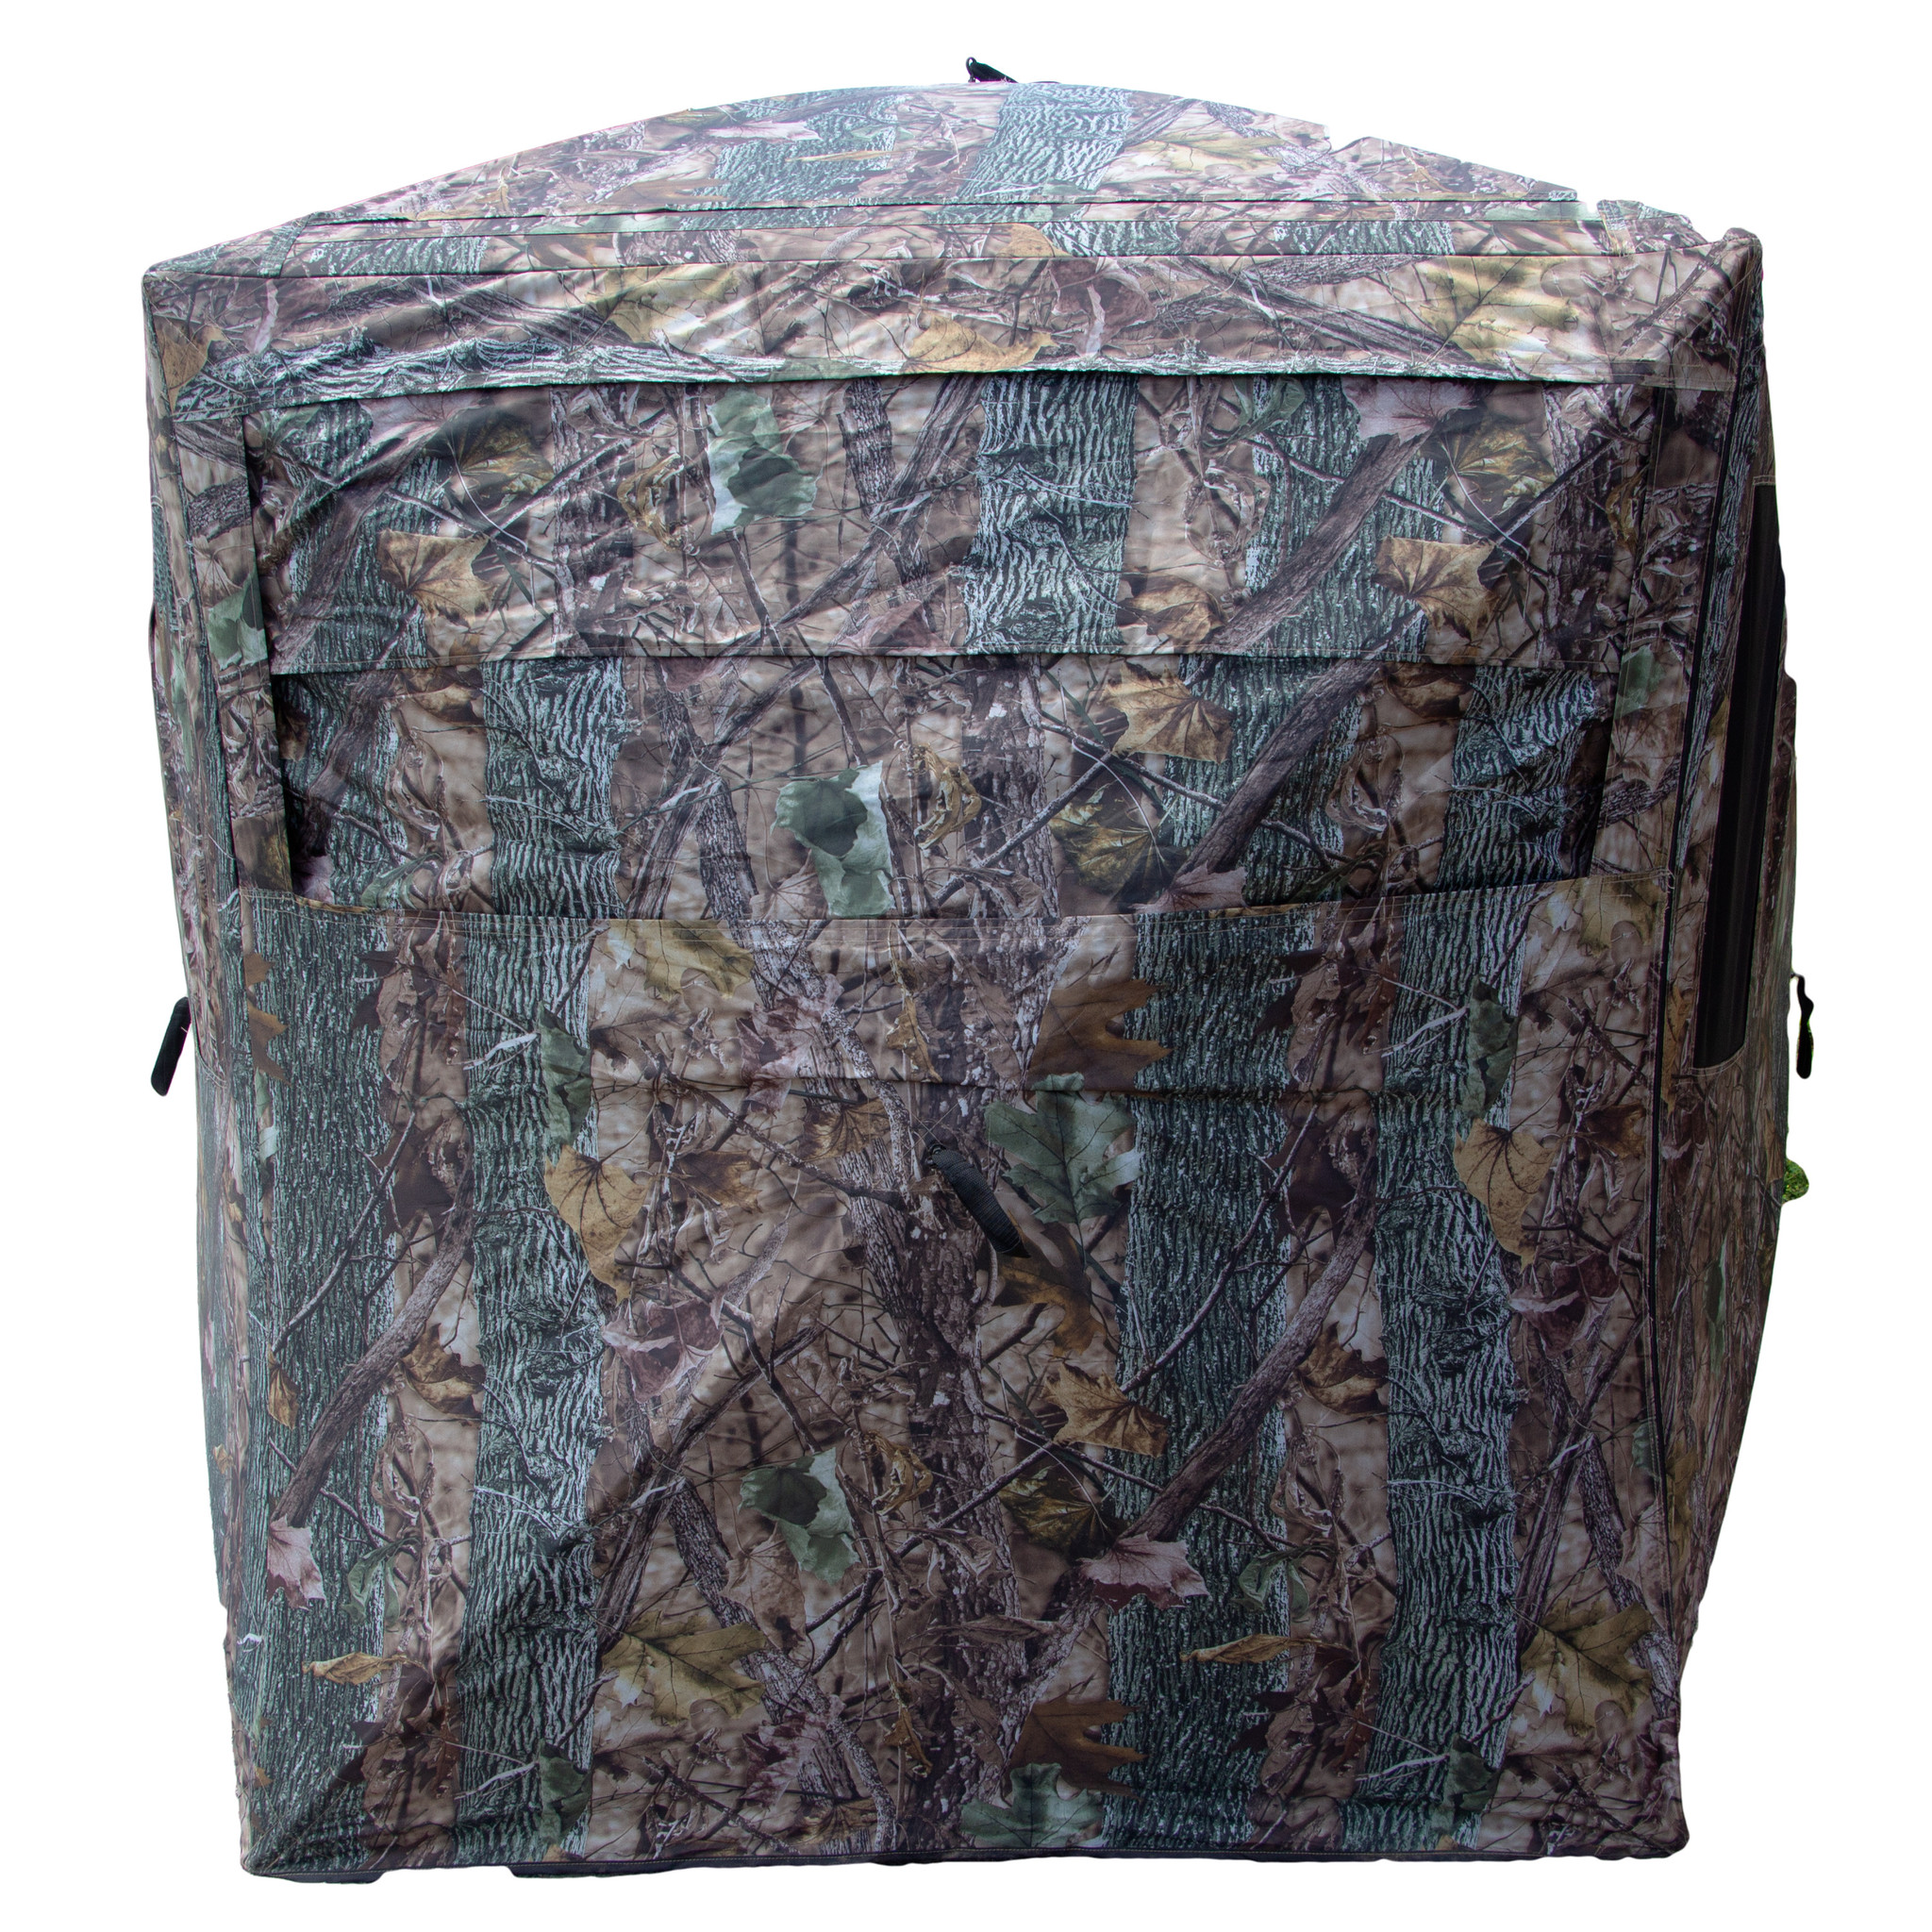 Rack Stacker The Stronghold Ground Blind by Rack Stacker